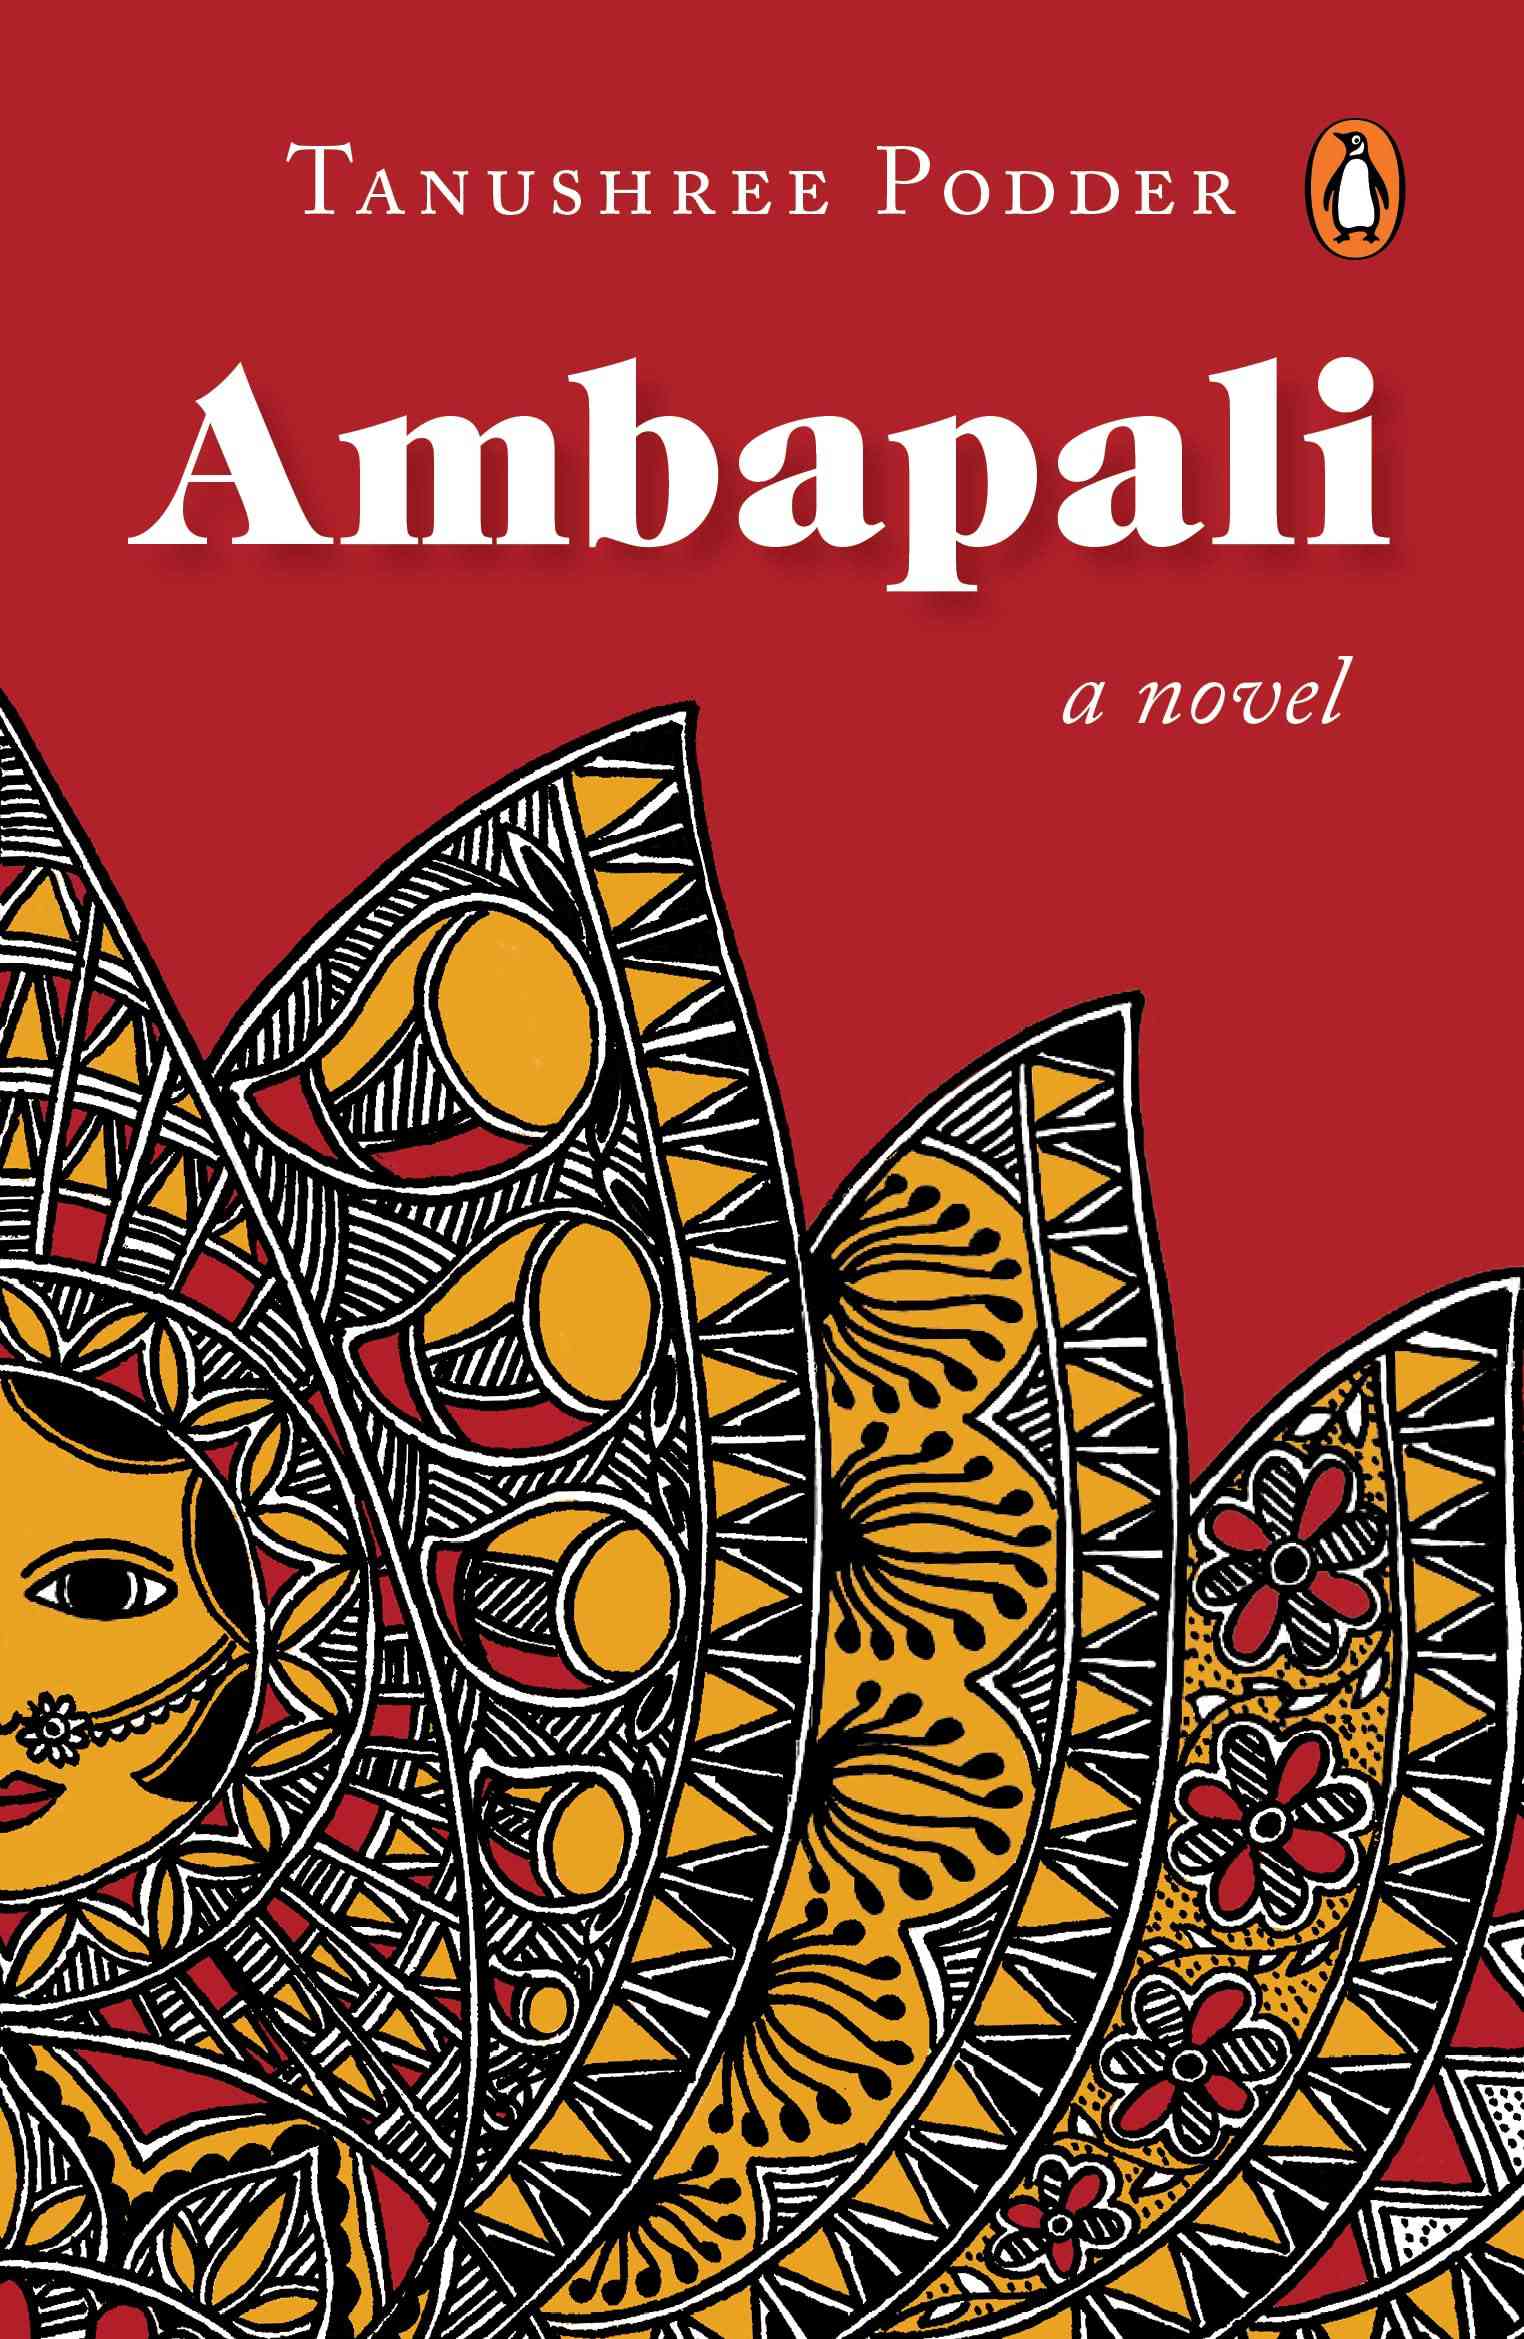 This is a remarkable and poignant novel about the dazzling glamour, daring romance, and sacrifice that marked Ambapali’s life